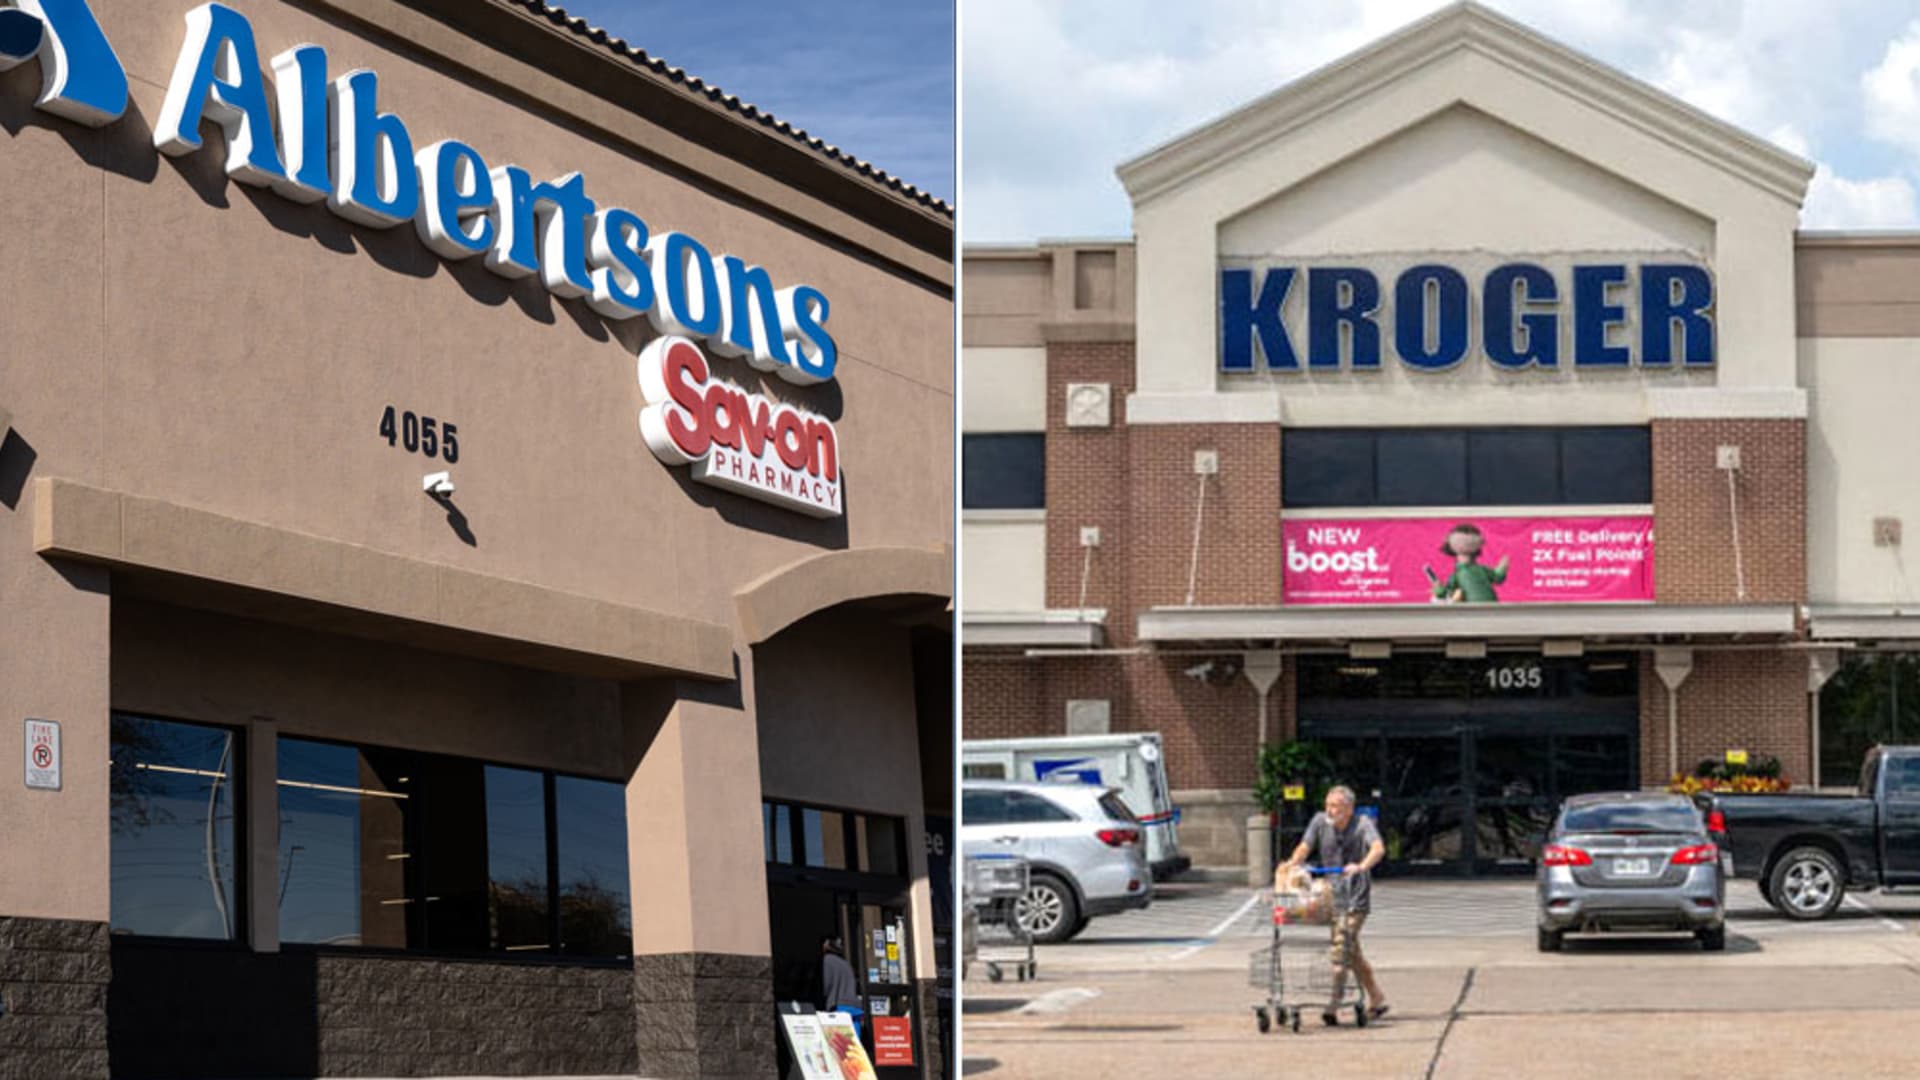 FTC Files Lawsuit to Block Kroger-Albertsons Merger, Citing Higher Grocery Prices and Lower Wages for Workers